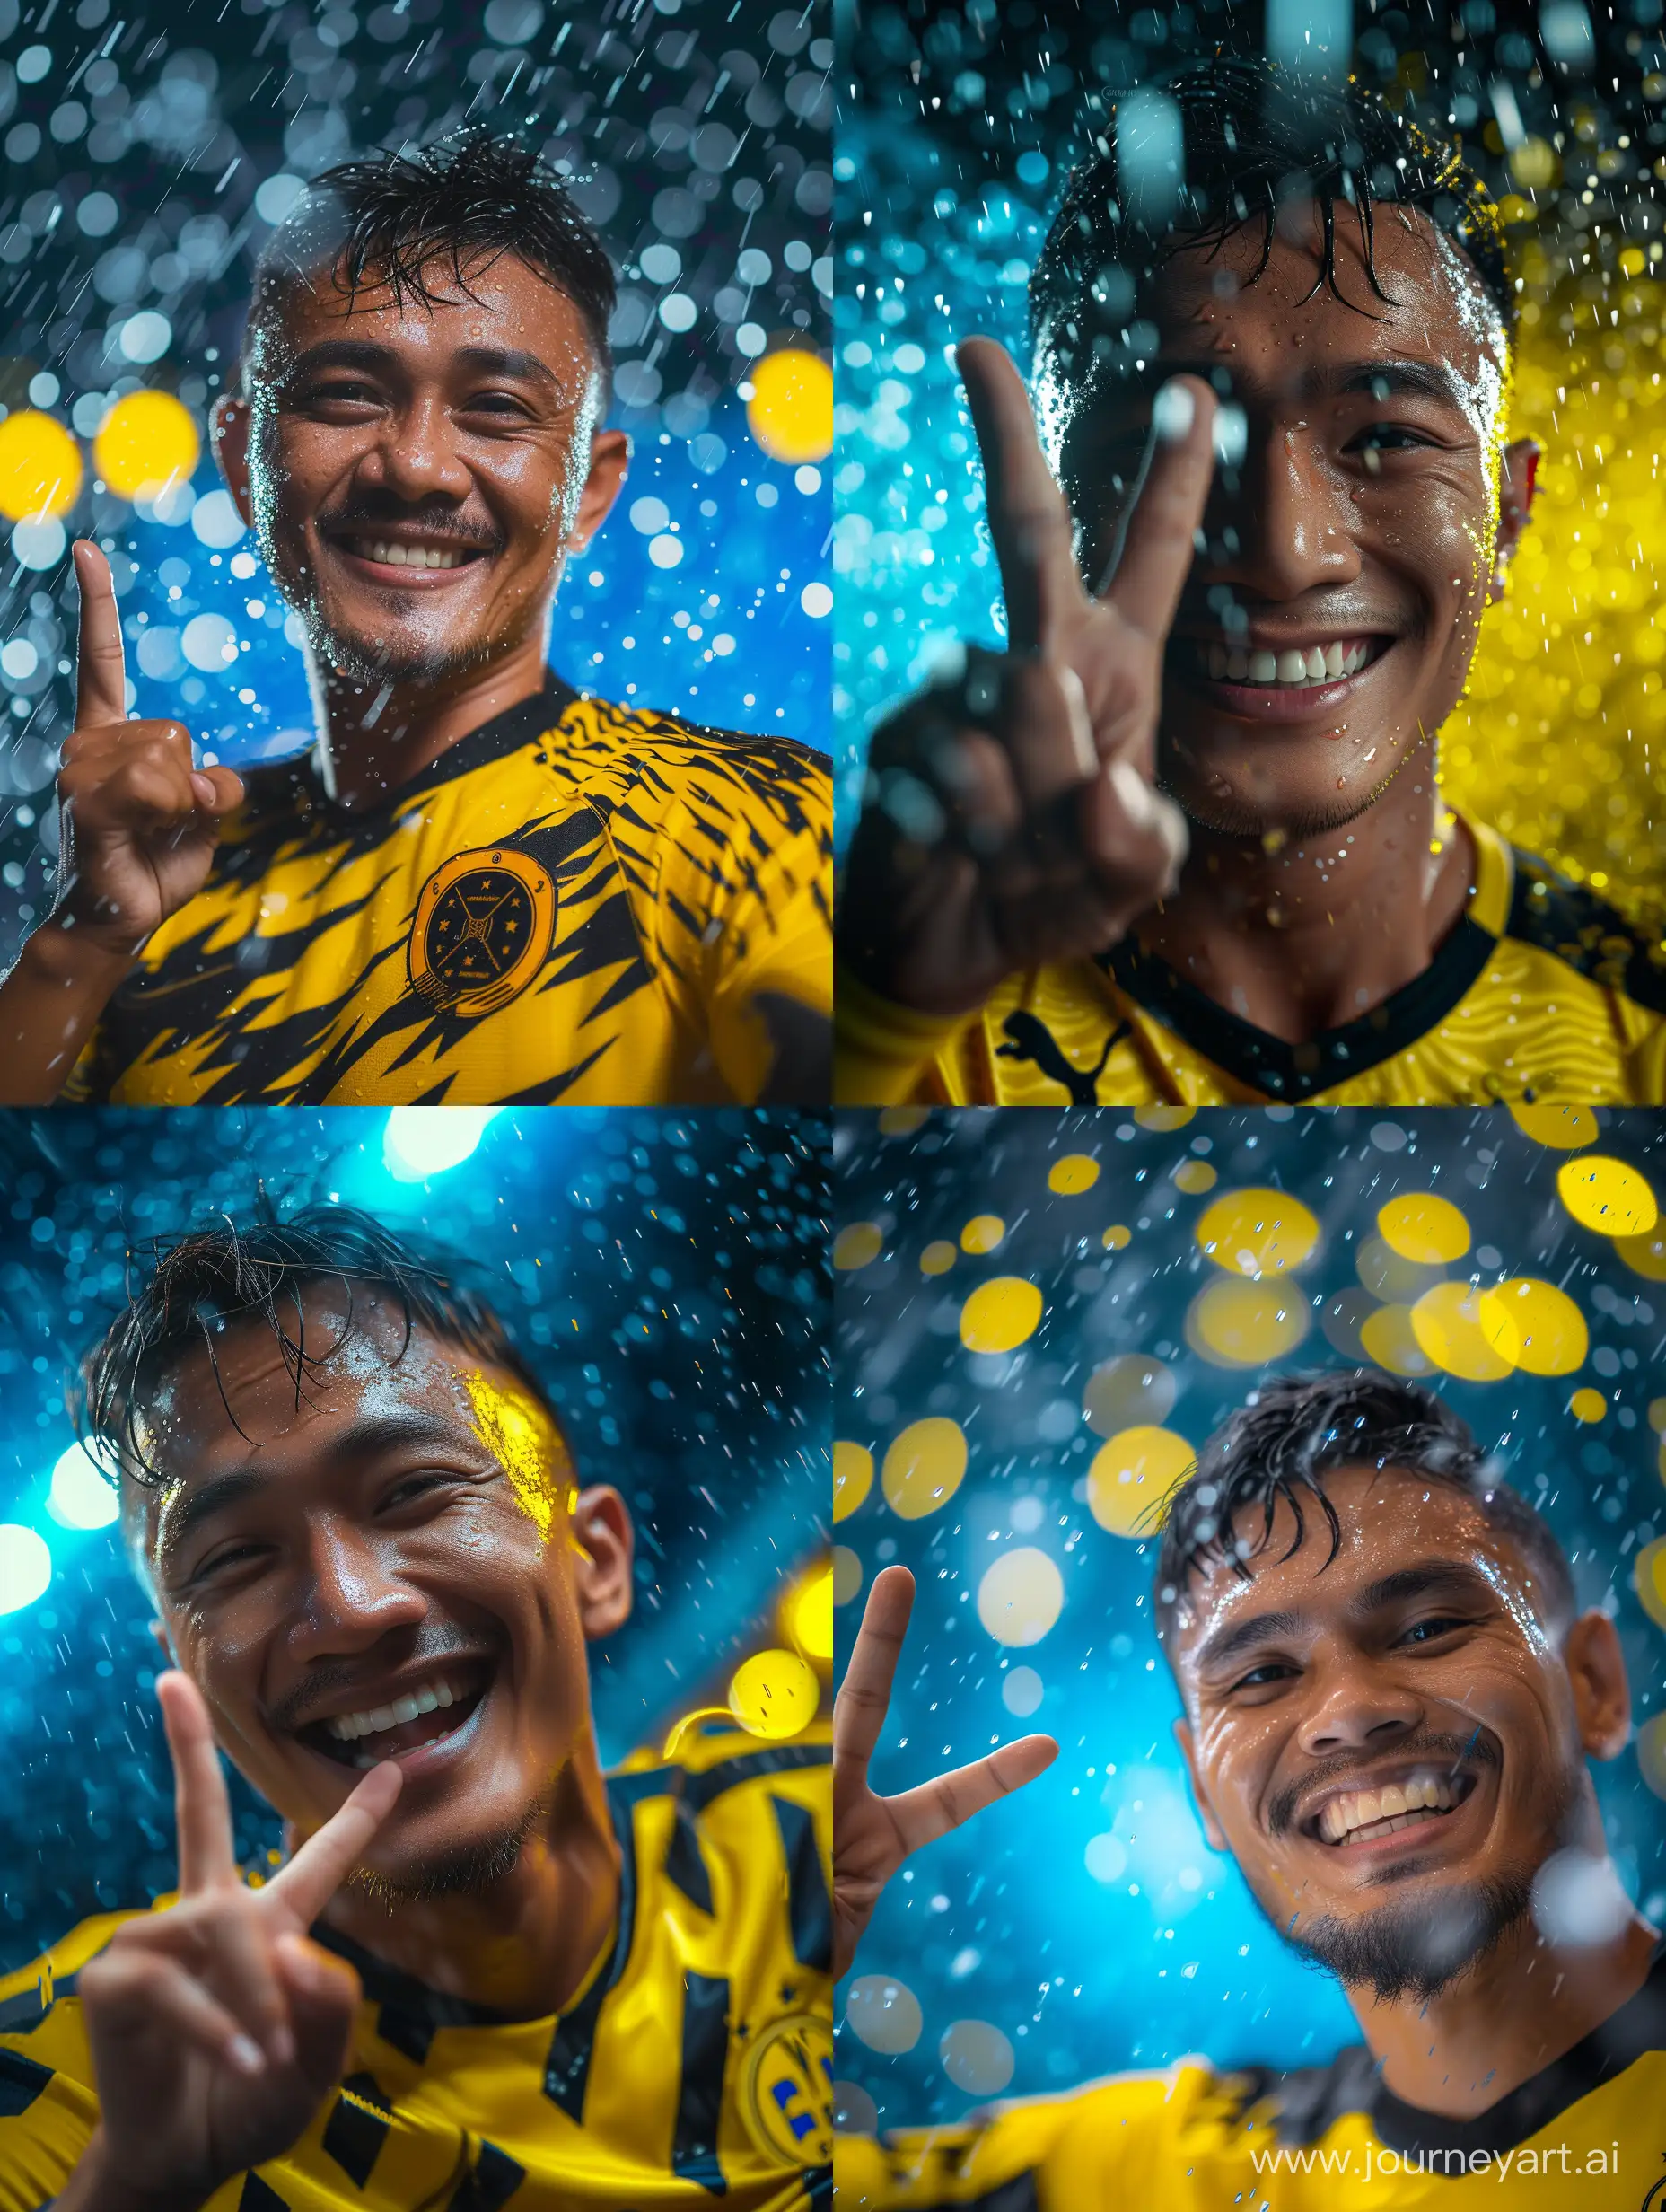 Ultra realistic, close up, Malay football player. shows the 'finger gun sign' while smiling. Wearing a yellow and black jersey. little raindrops. blue and yellow lights behind. canon eos-id x mark iii dslr --v 6.0